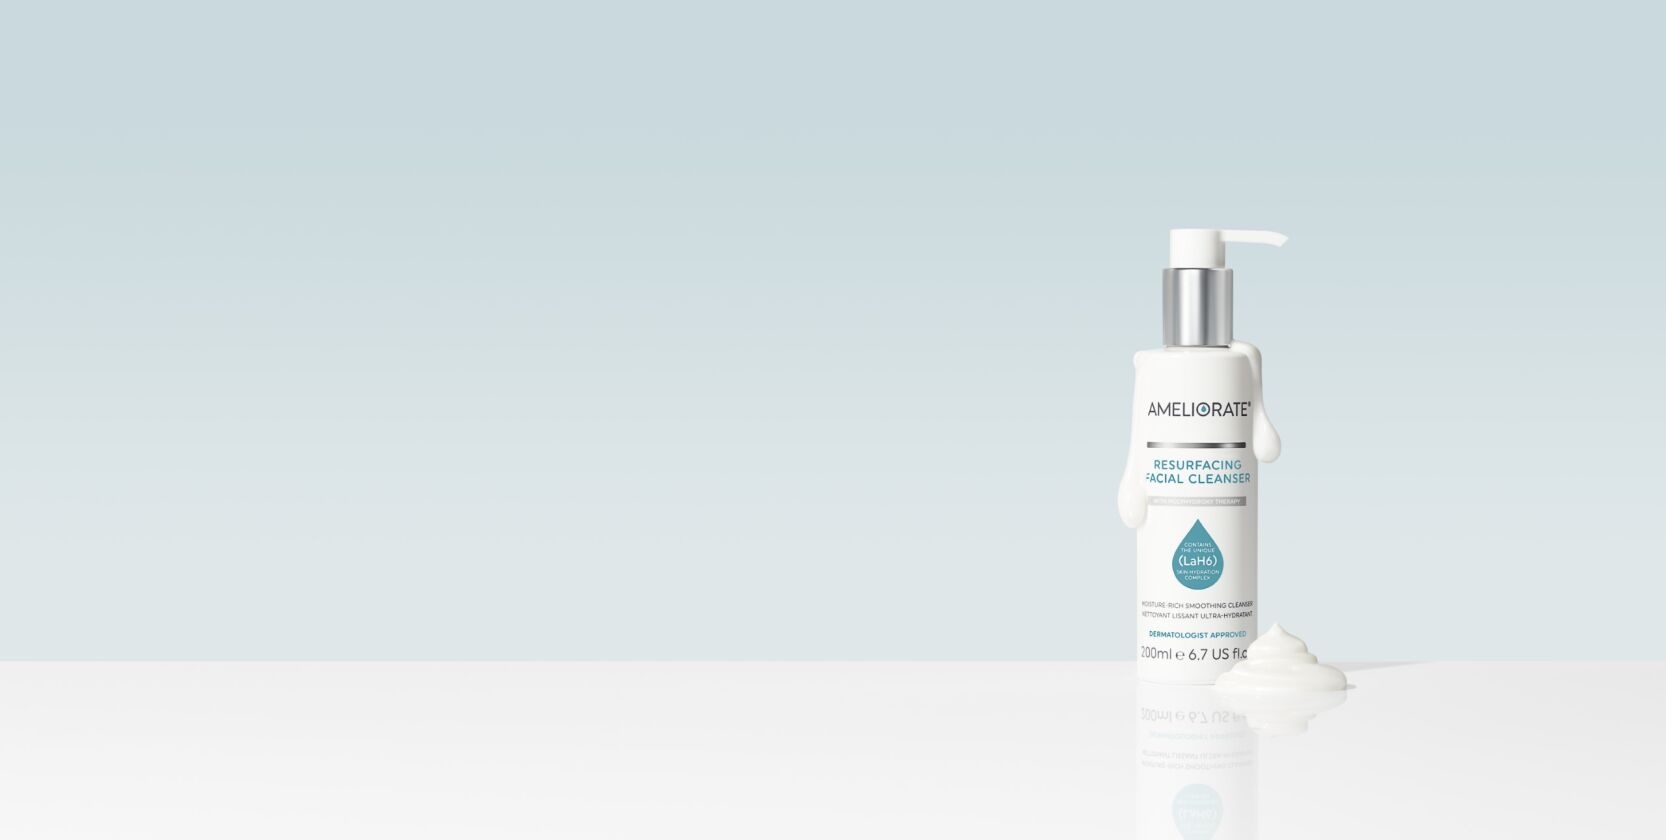 AMELIORATE's 5 Tips for a Skincare Spring Clean